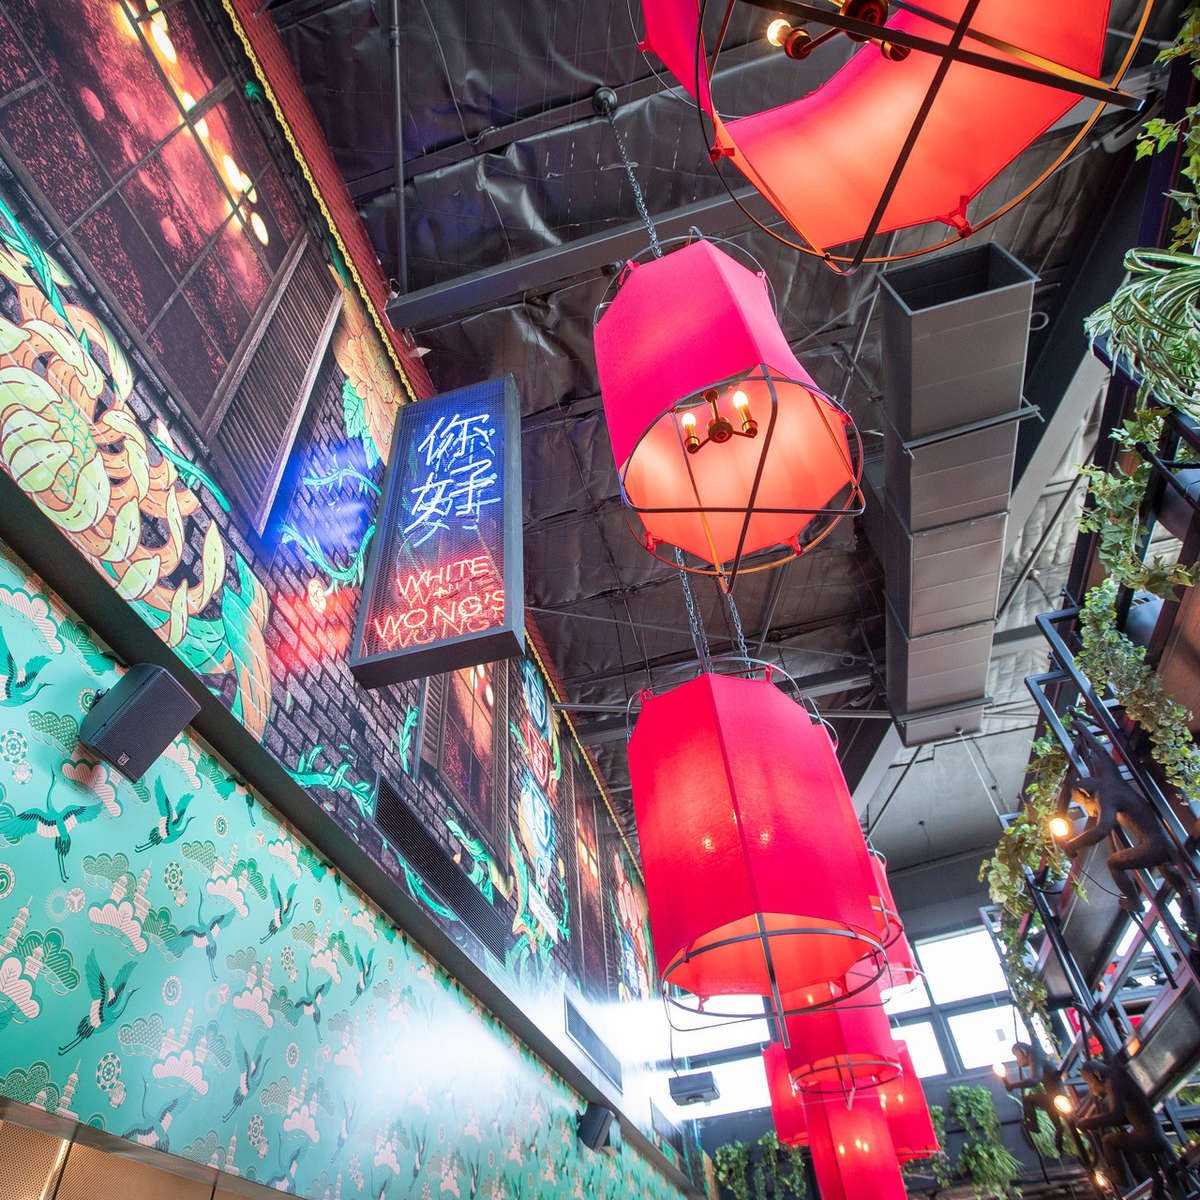 View looking up at lanterns and neon artwork in rooftop dining area